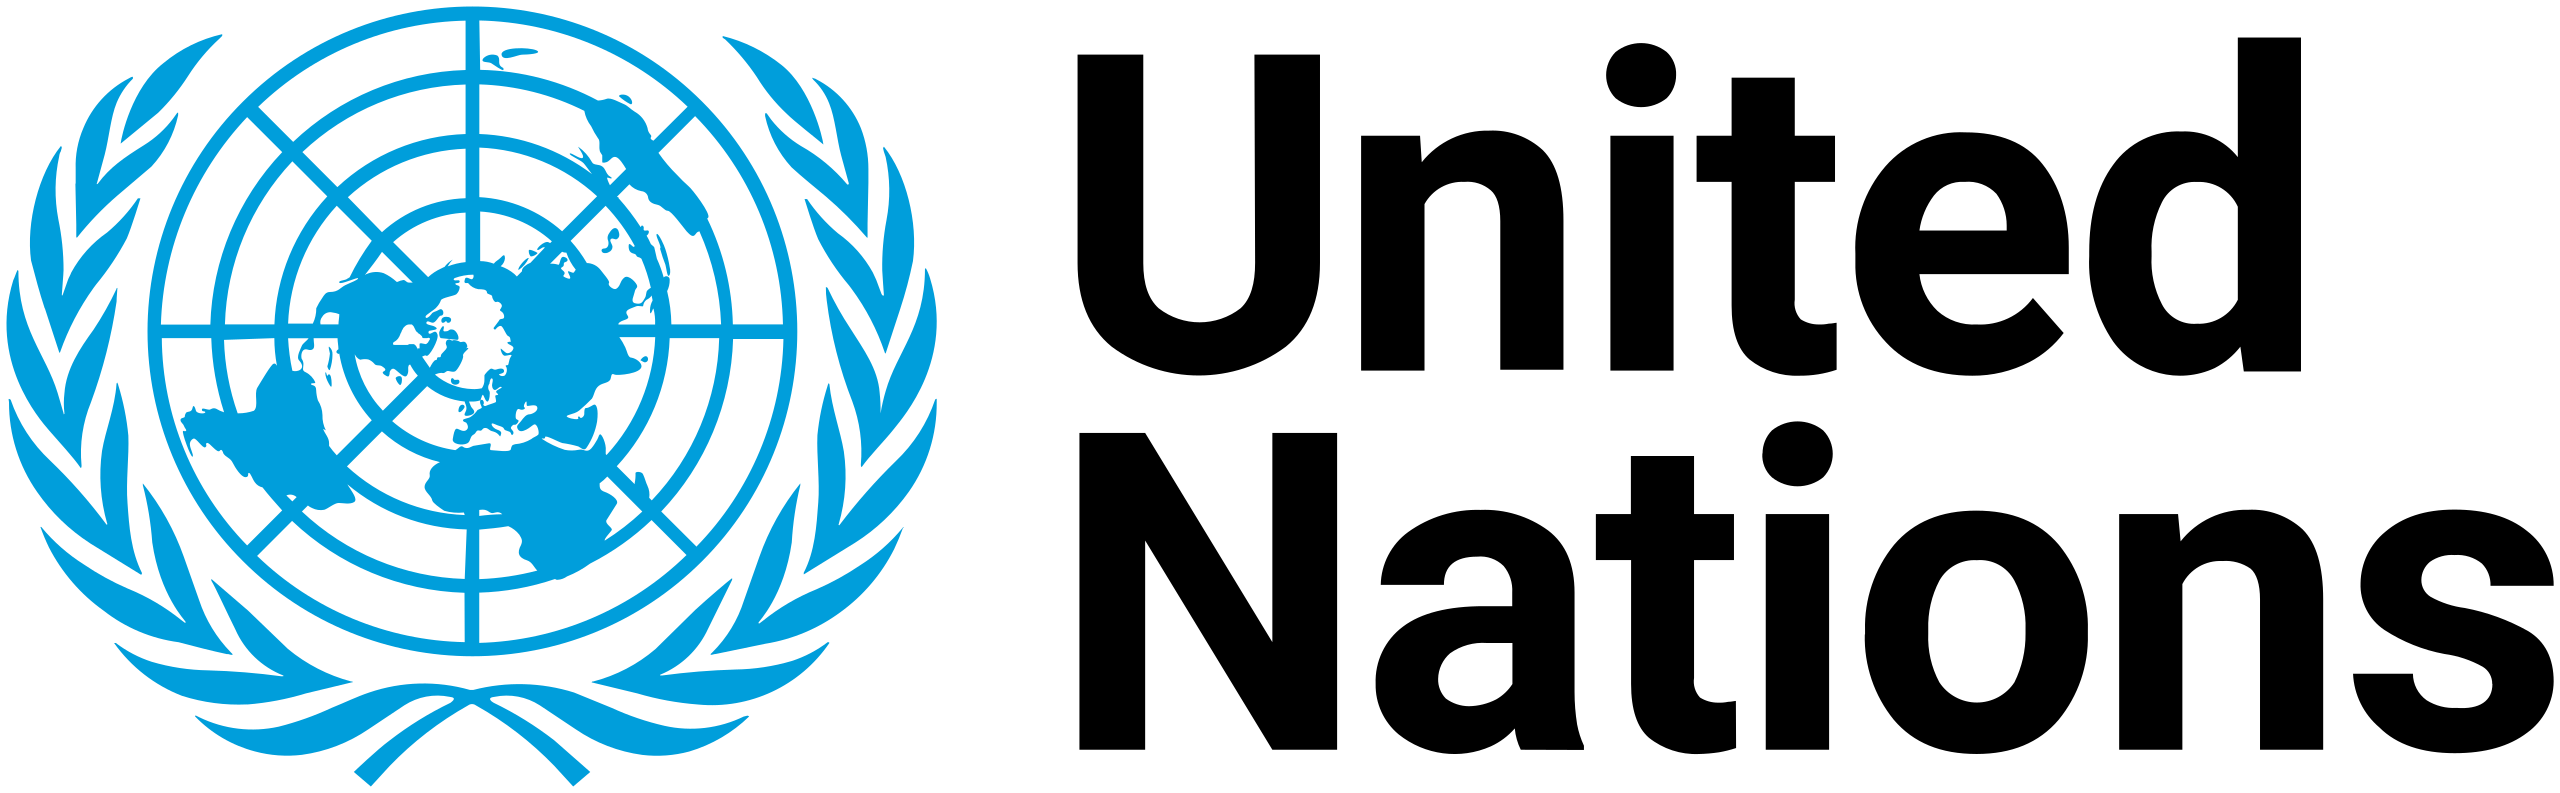 Logo of the United Nations.svg